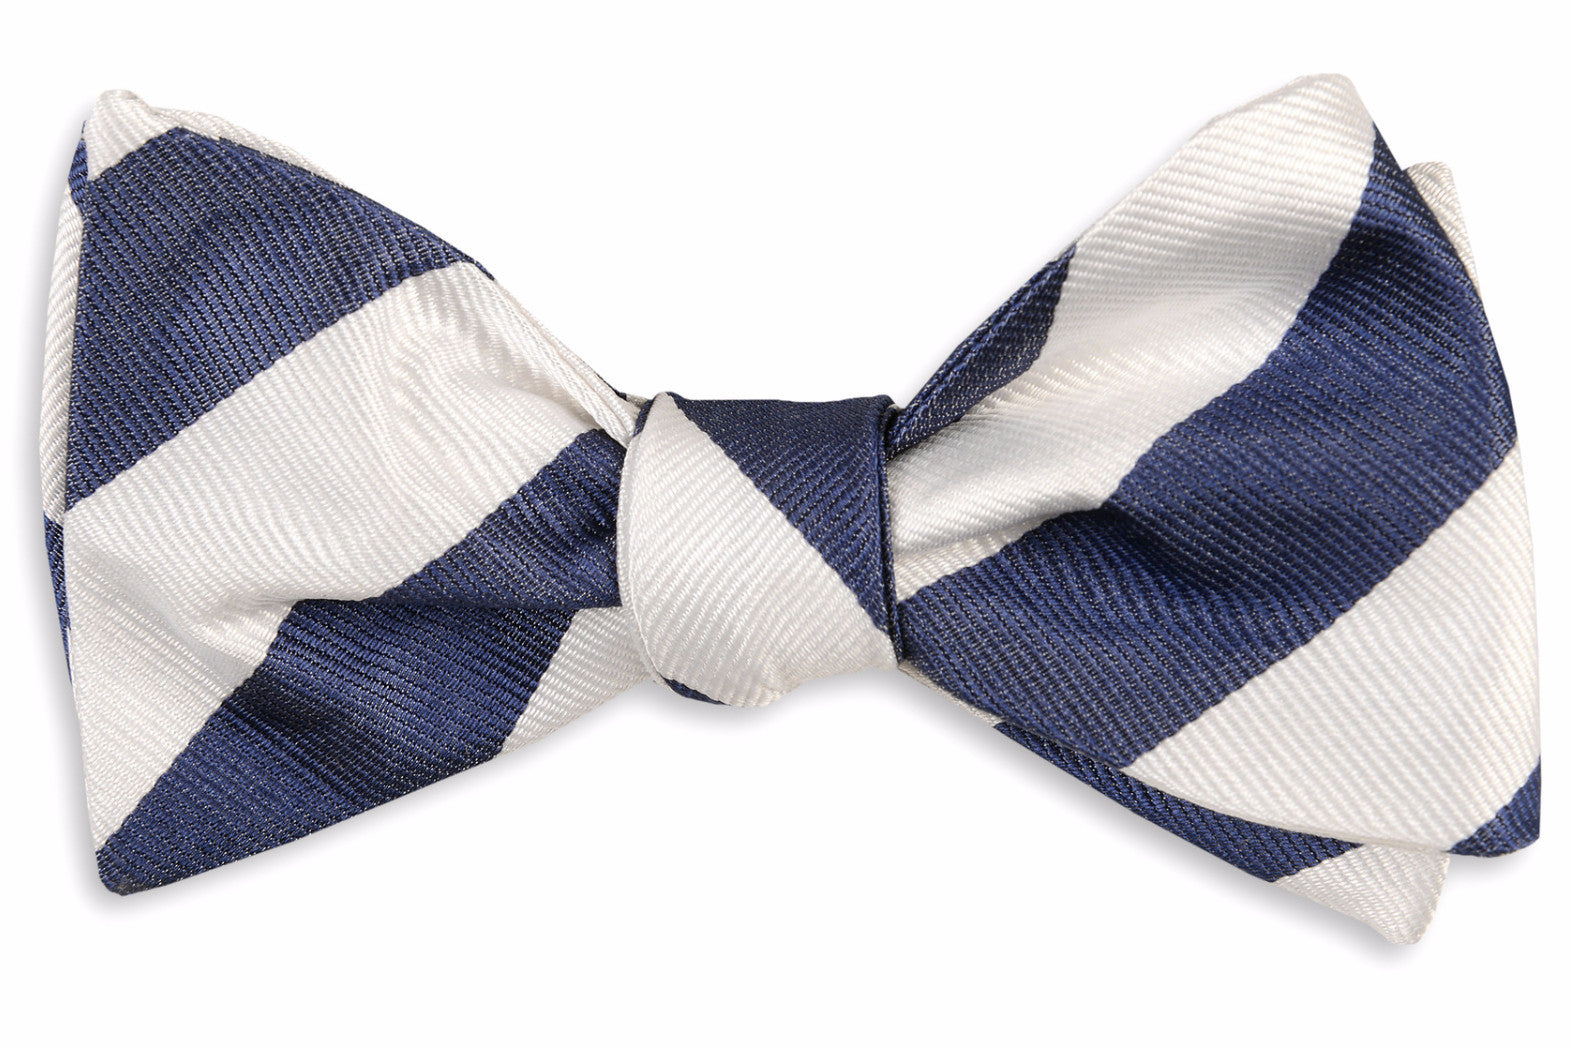 Classic Navy and White Stripe Bow Tie | Silk Bow Ties for Men - High Cotton